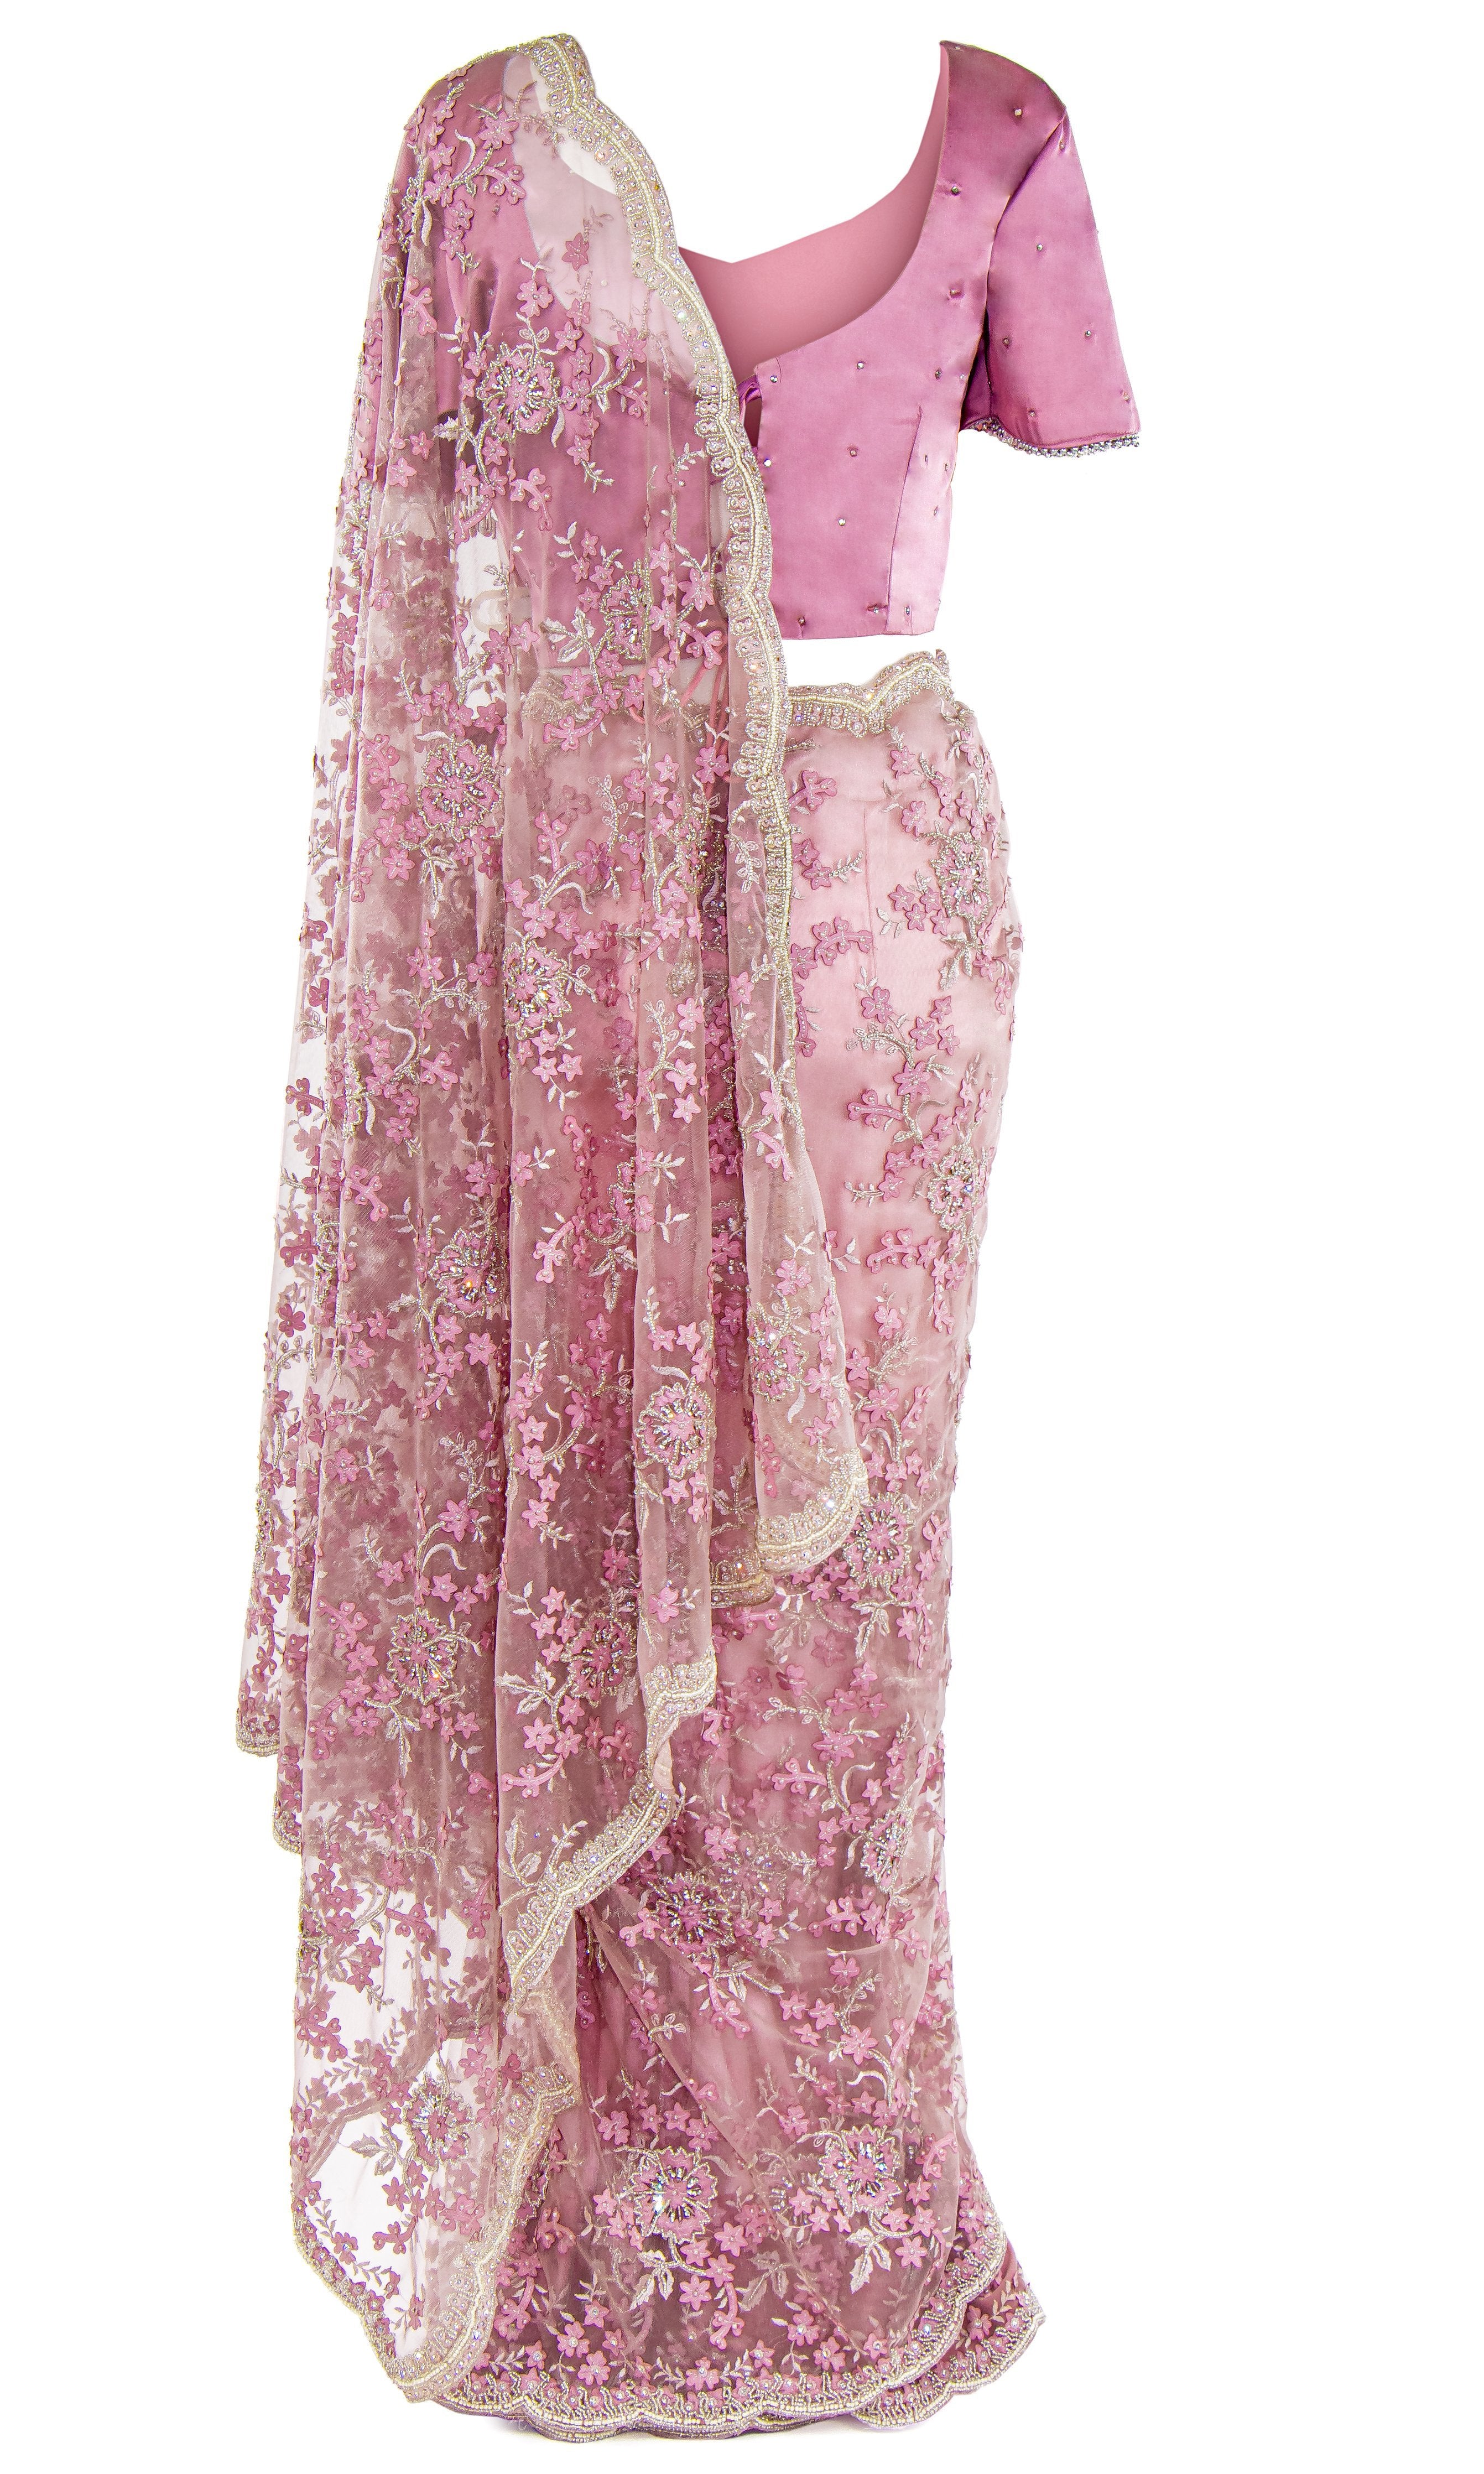  Saree is pre-stitched and pre-pleated, Matching petticoat is included.